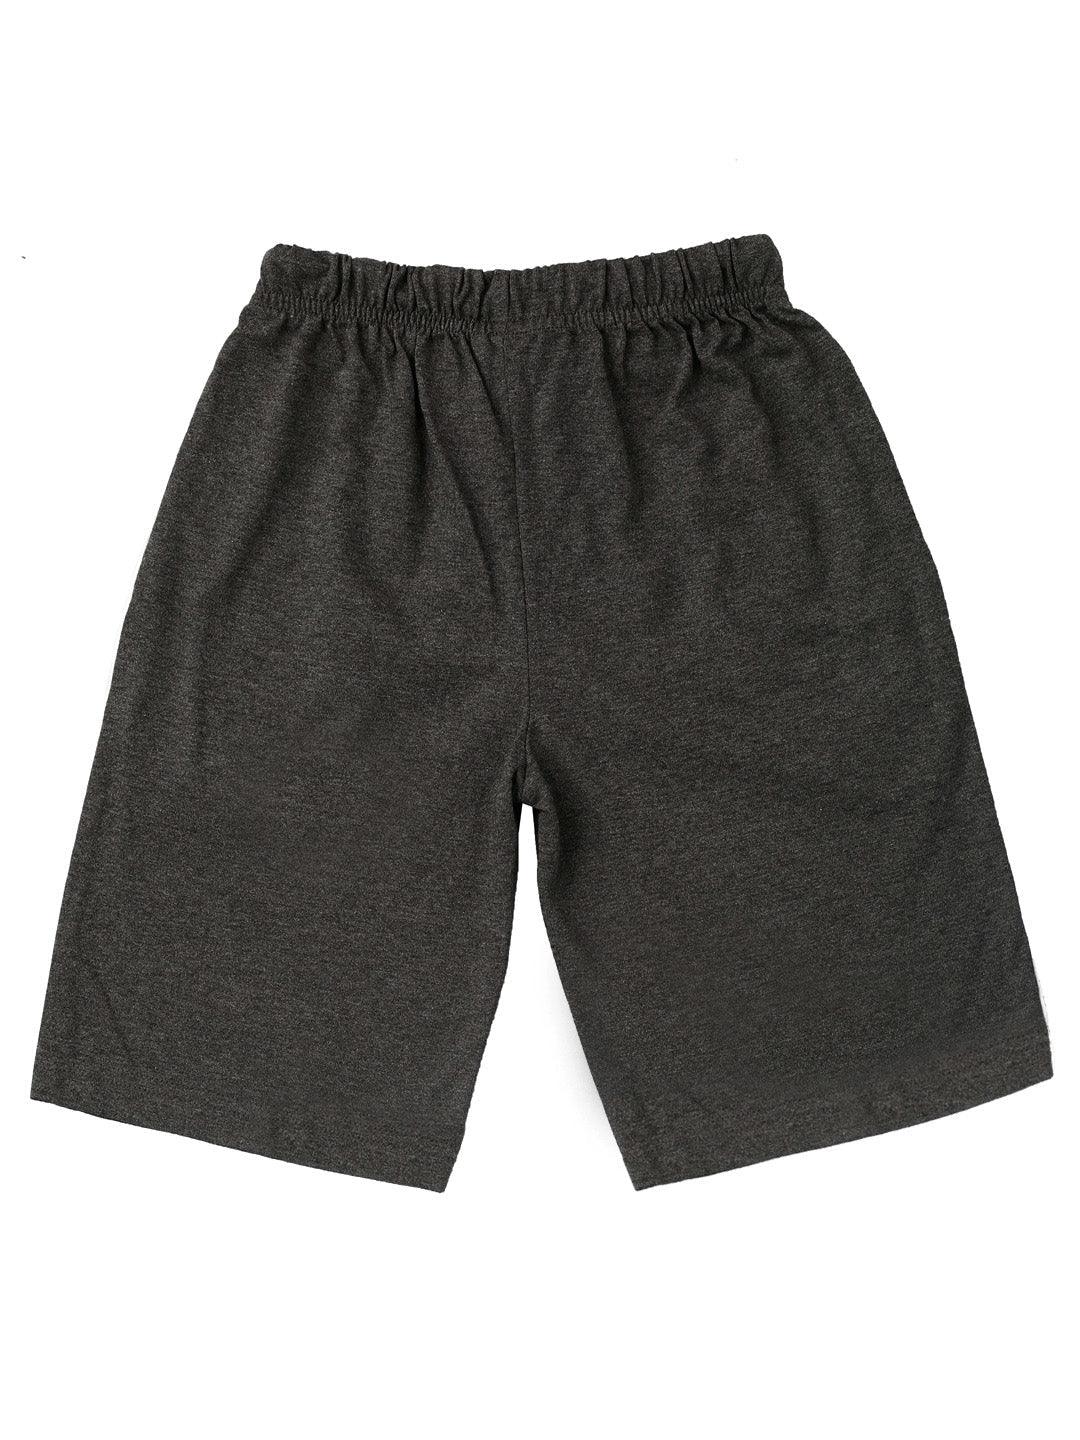 All Stars Charcoal Shorts - Juscubs